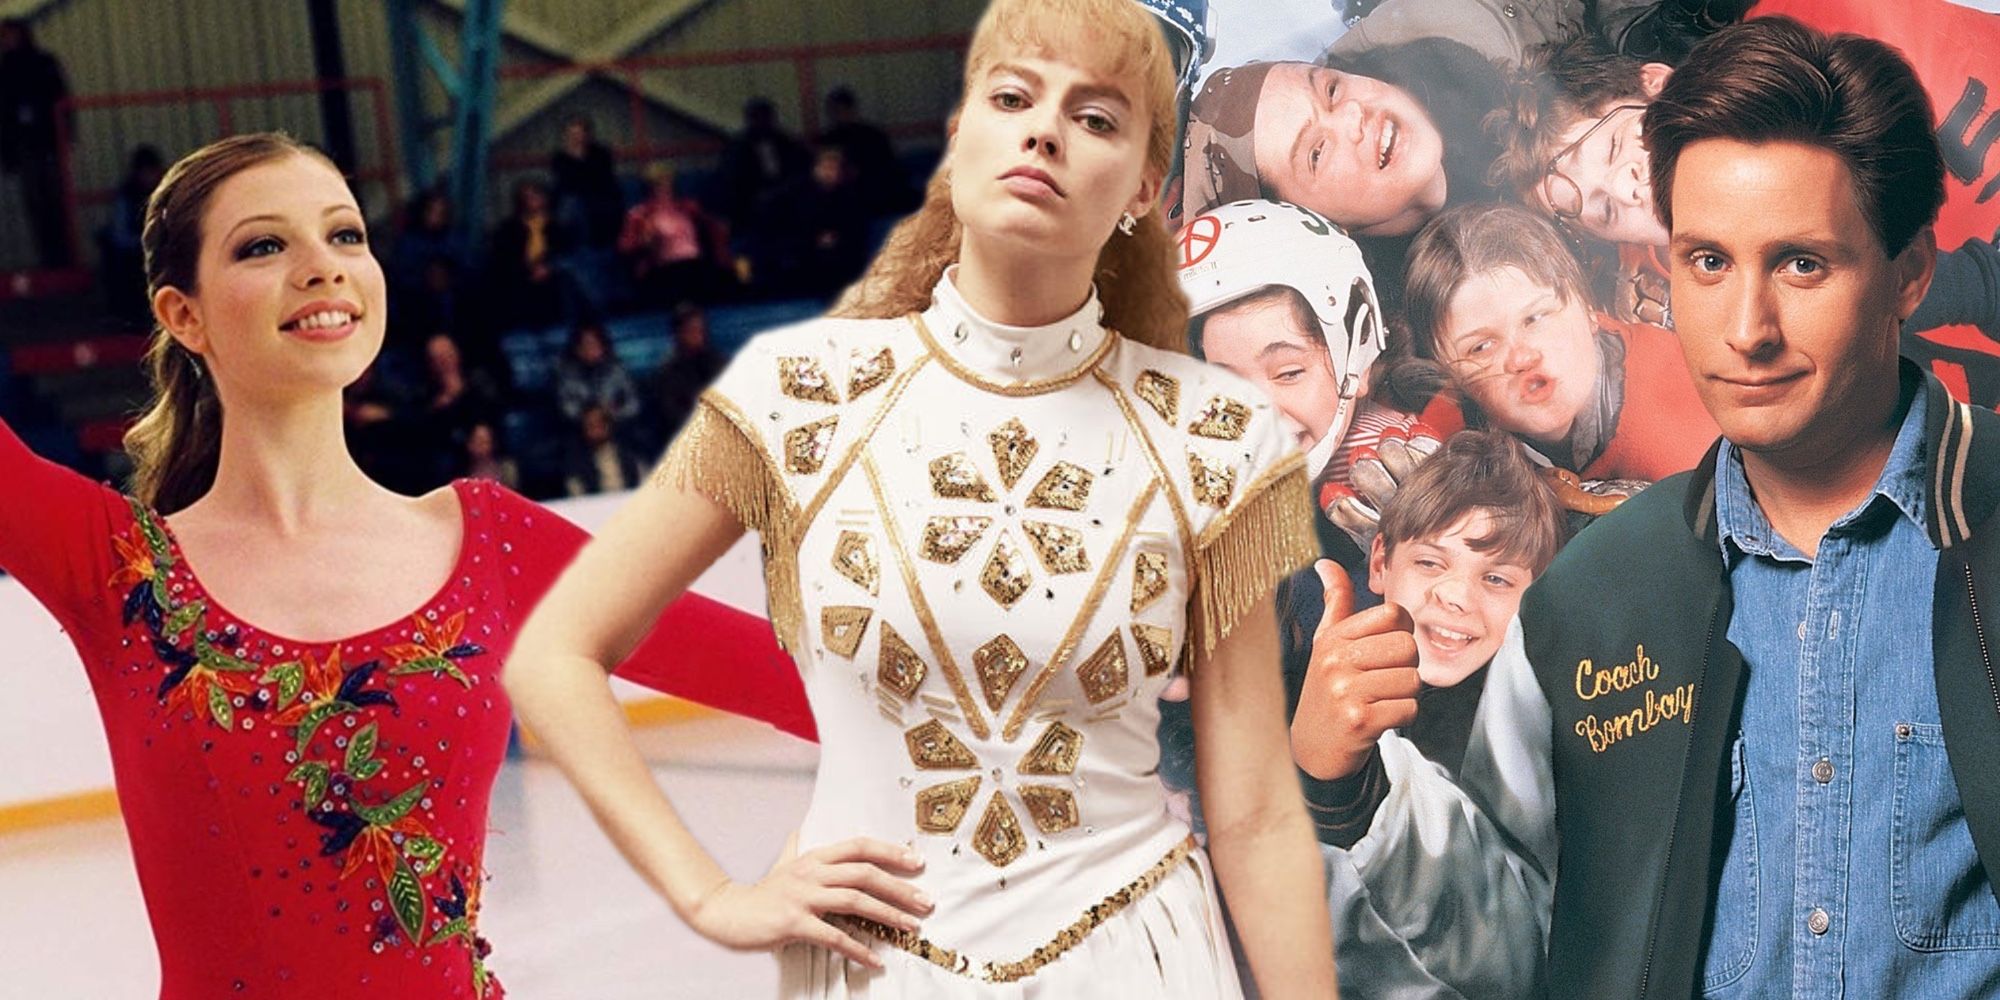 A composite image of characters from Ice Princess, I, Tonya, and The Mighty Ducks